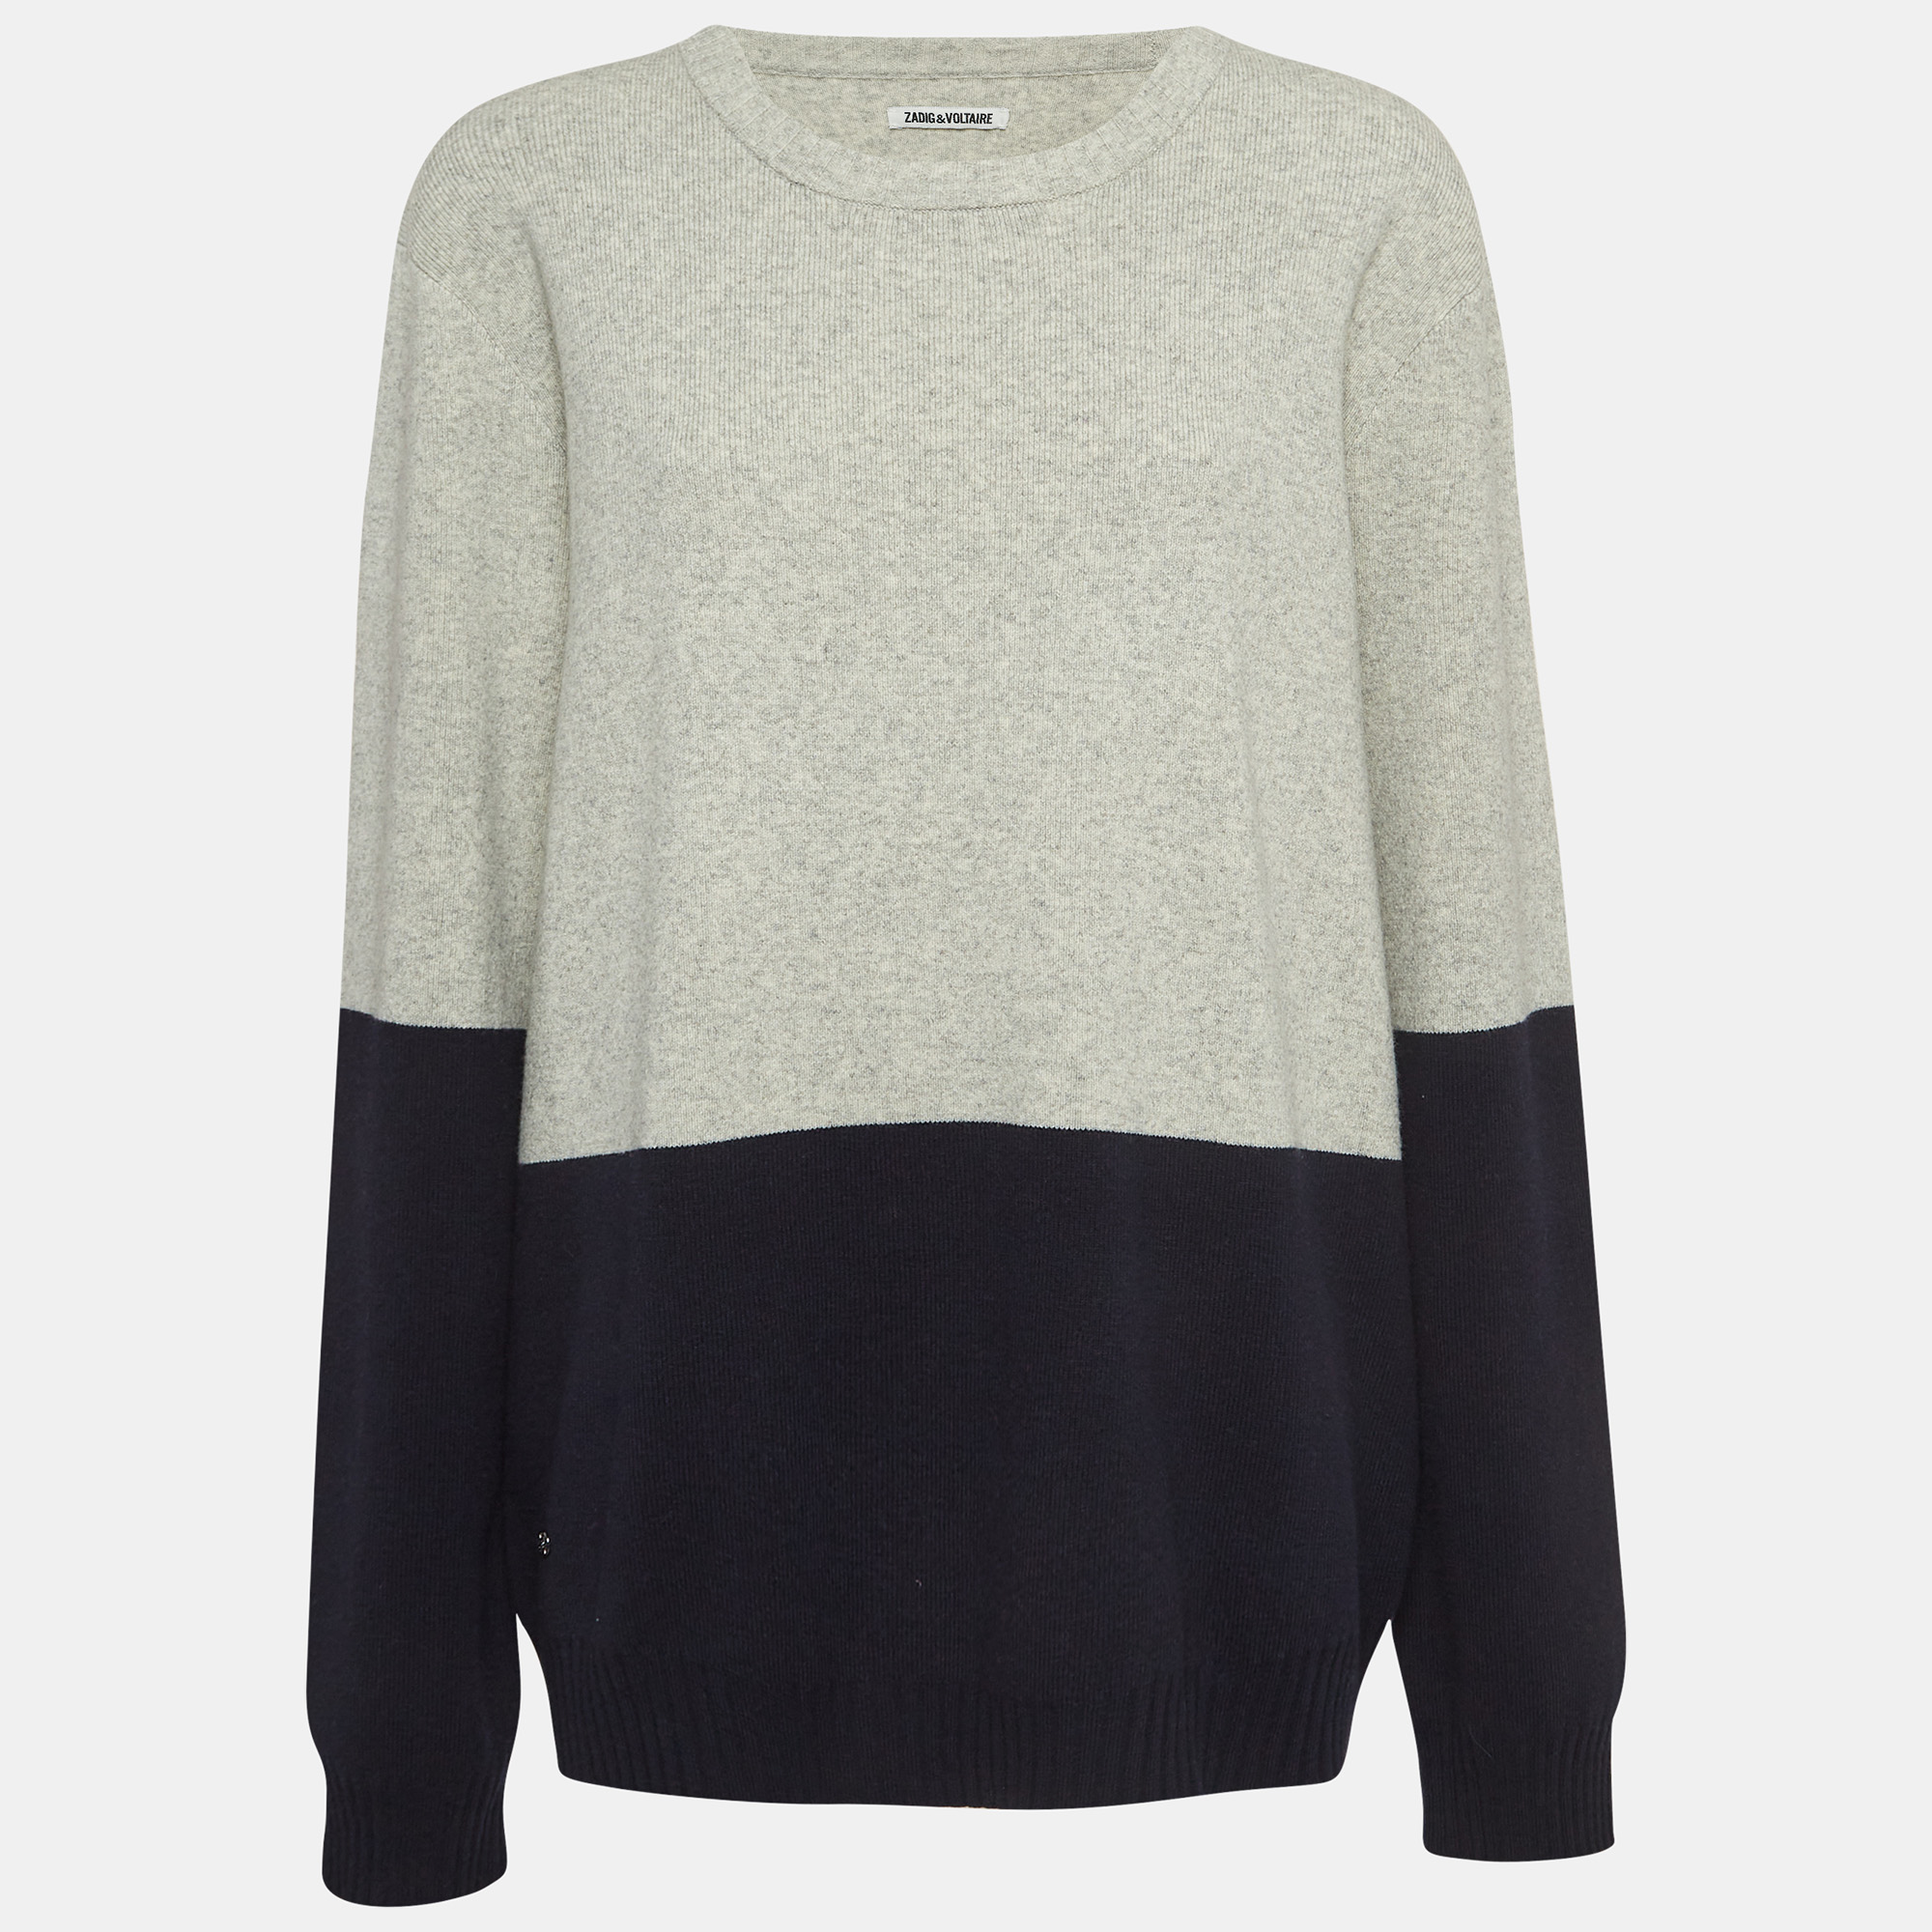 

Zadig & Voltaire Grey/Navy Blue Wool Rib Knit Crew Neck Sweater